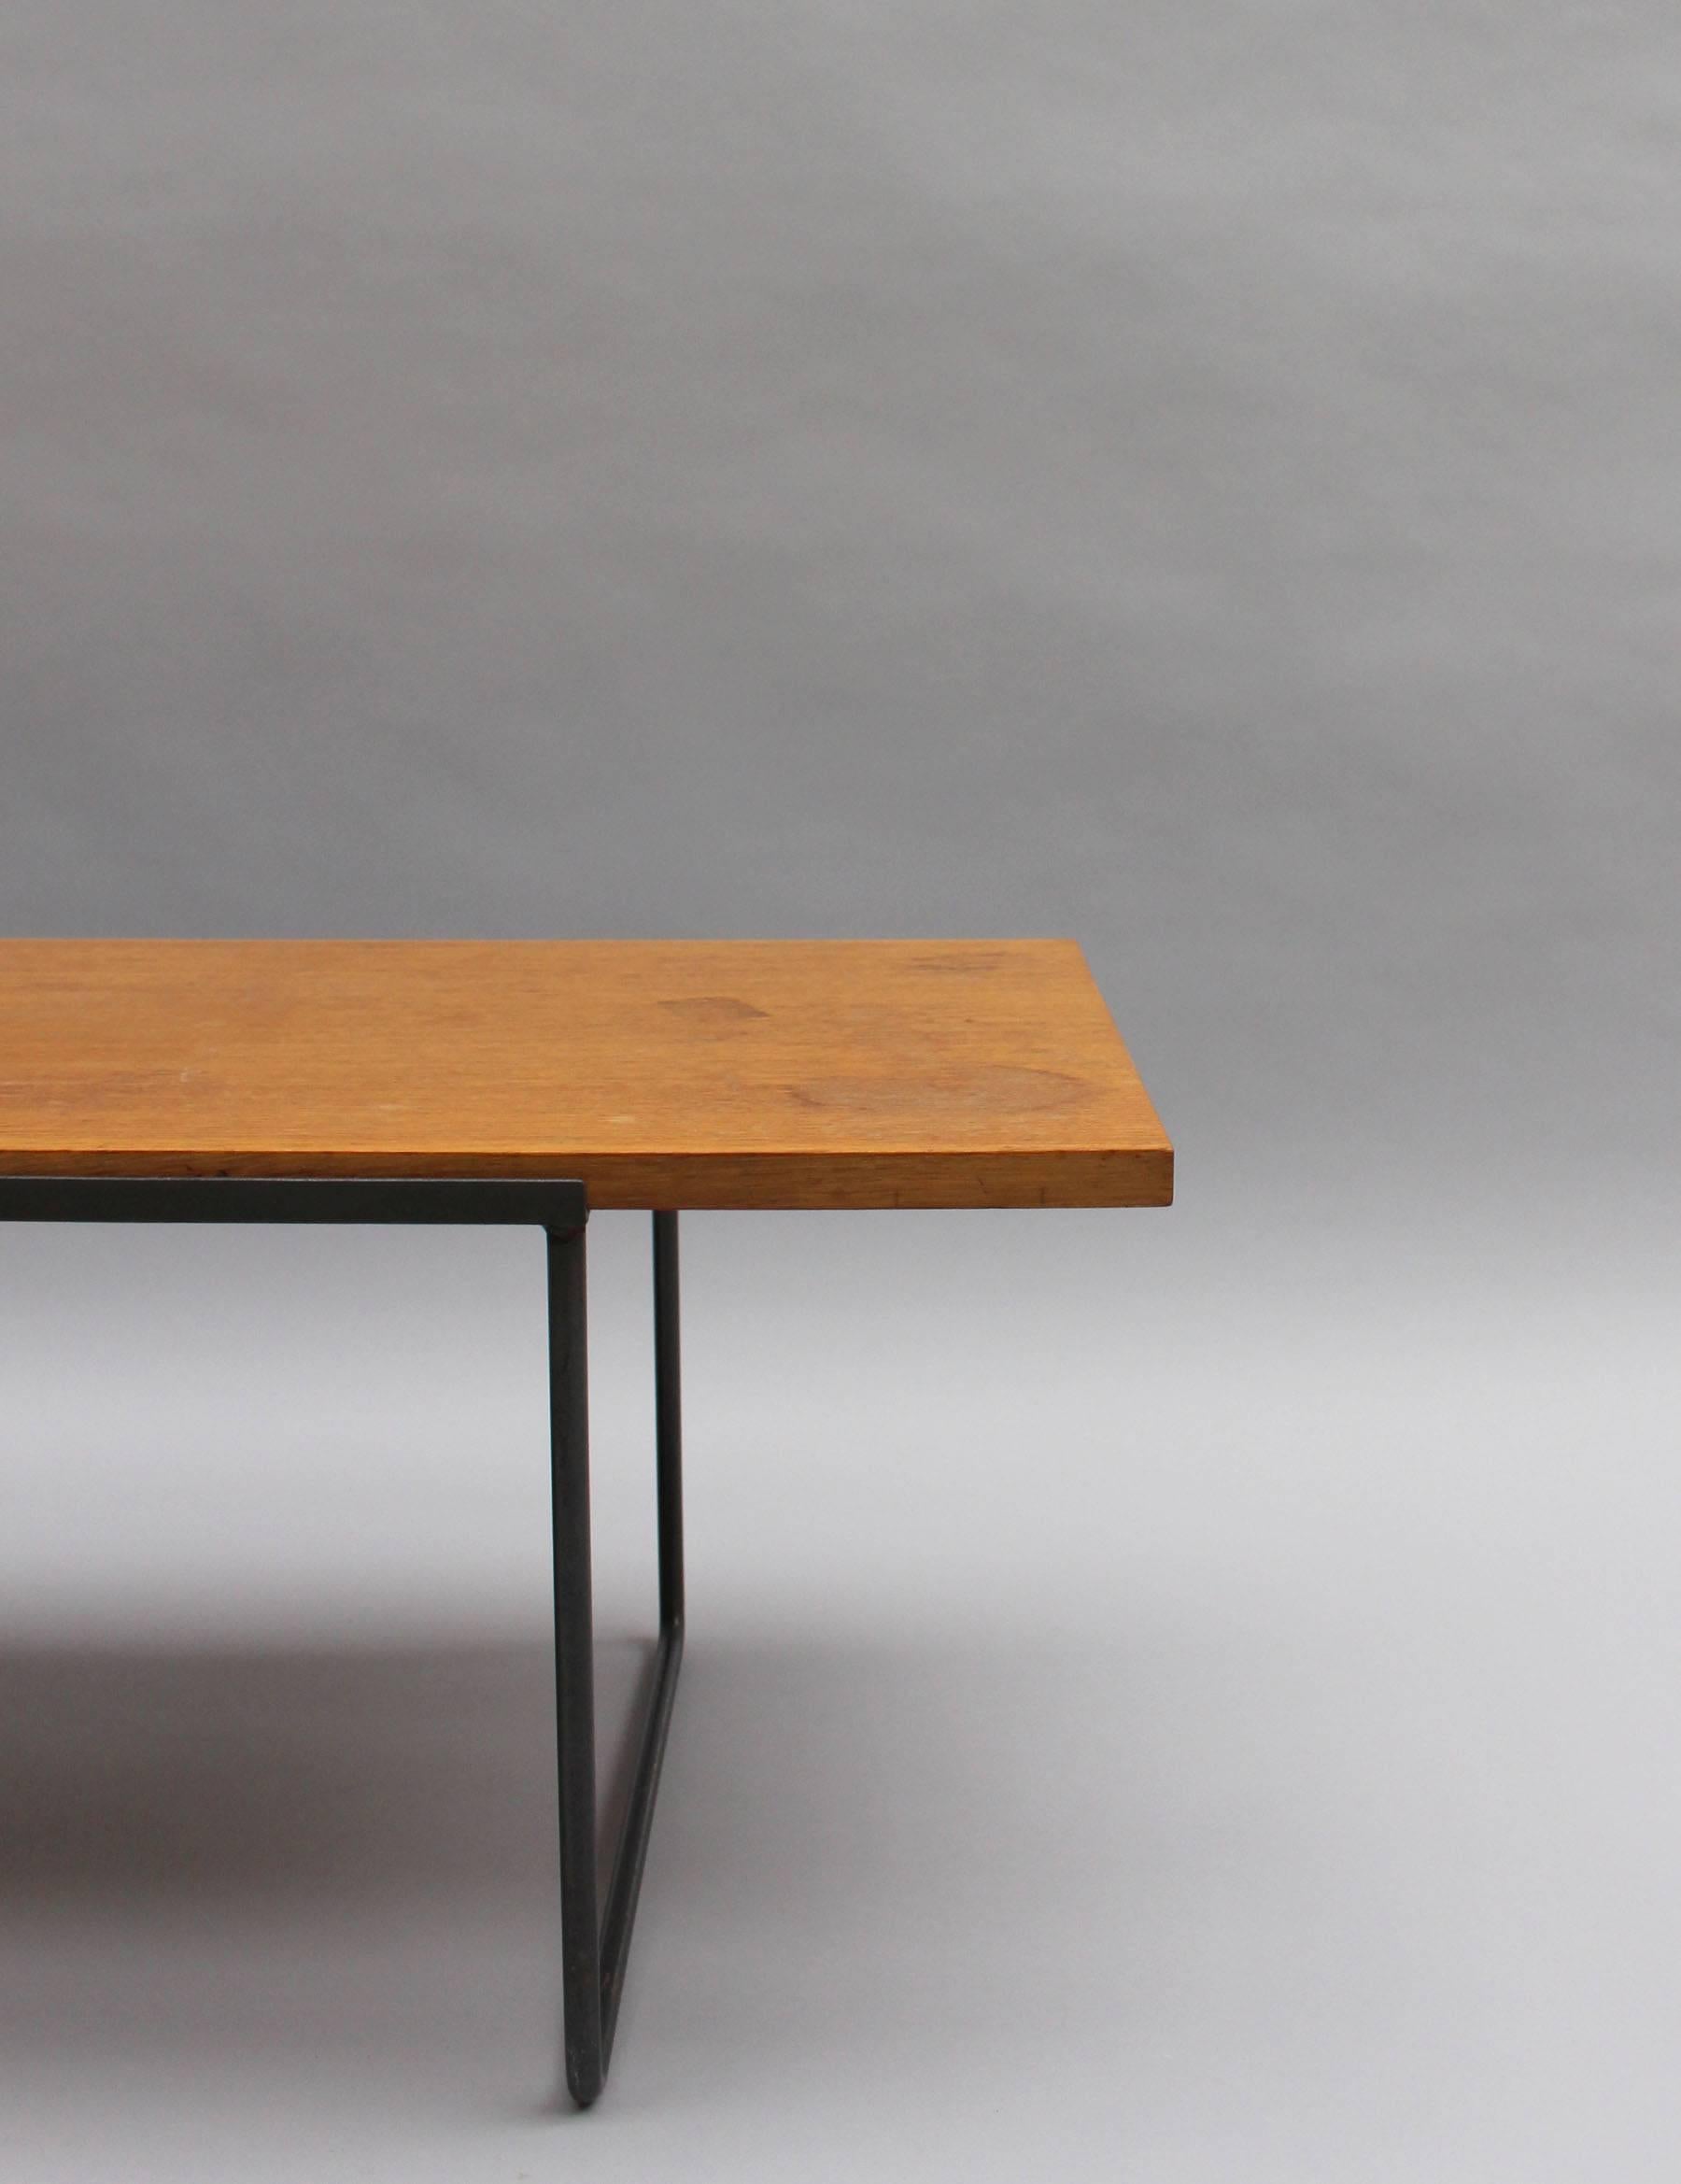 A Fine French Mid-Century Oak and Laminate Coffee Table with a Metal Base 5